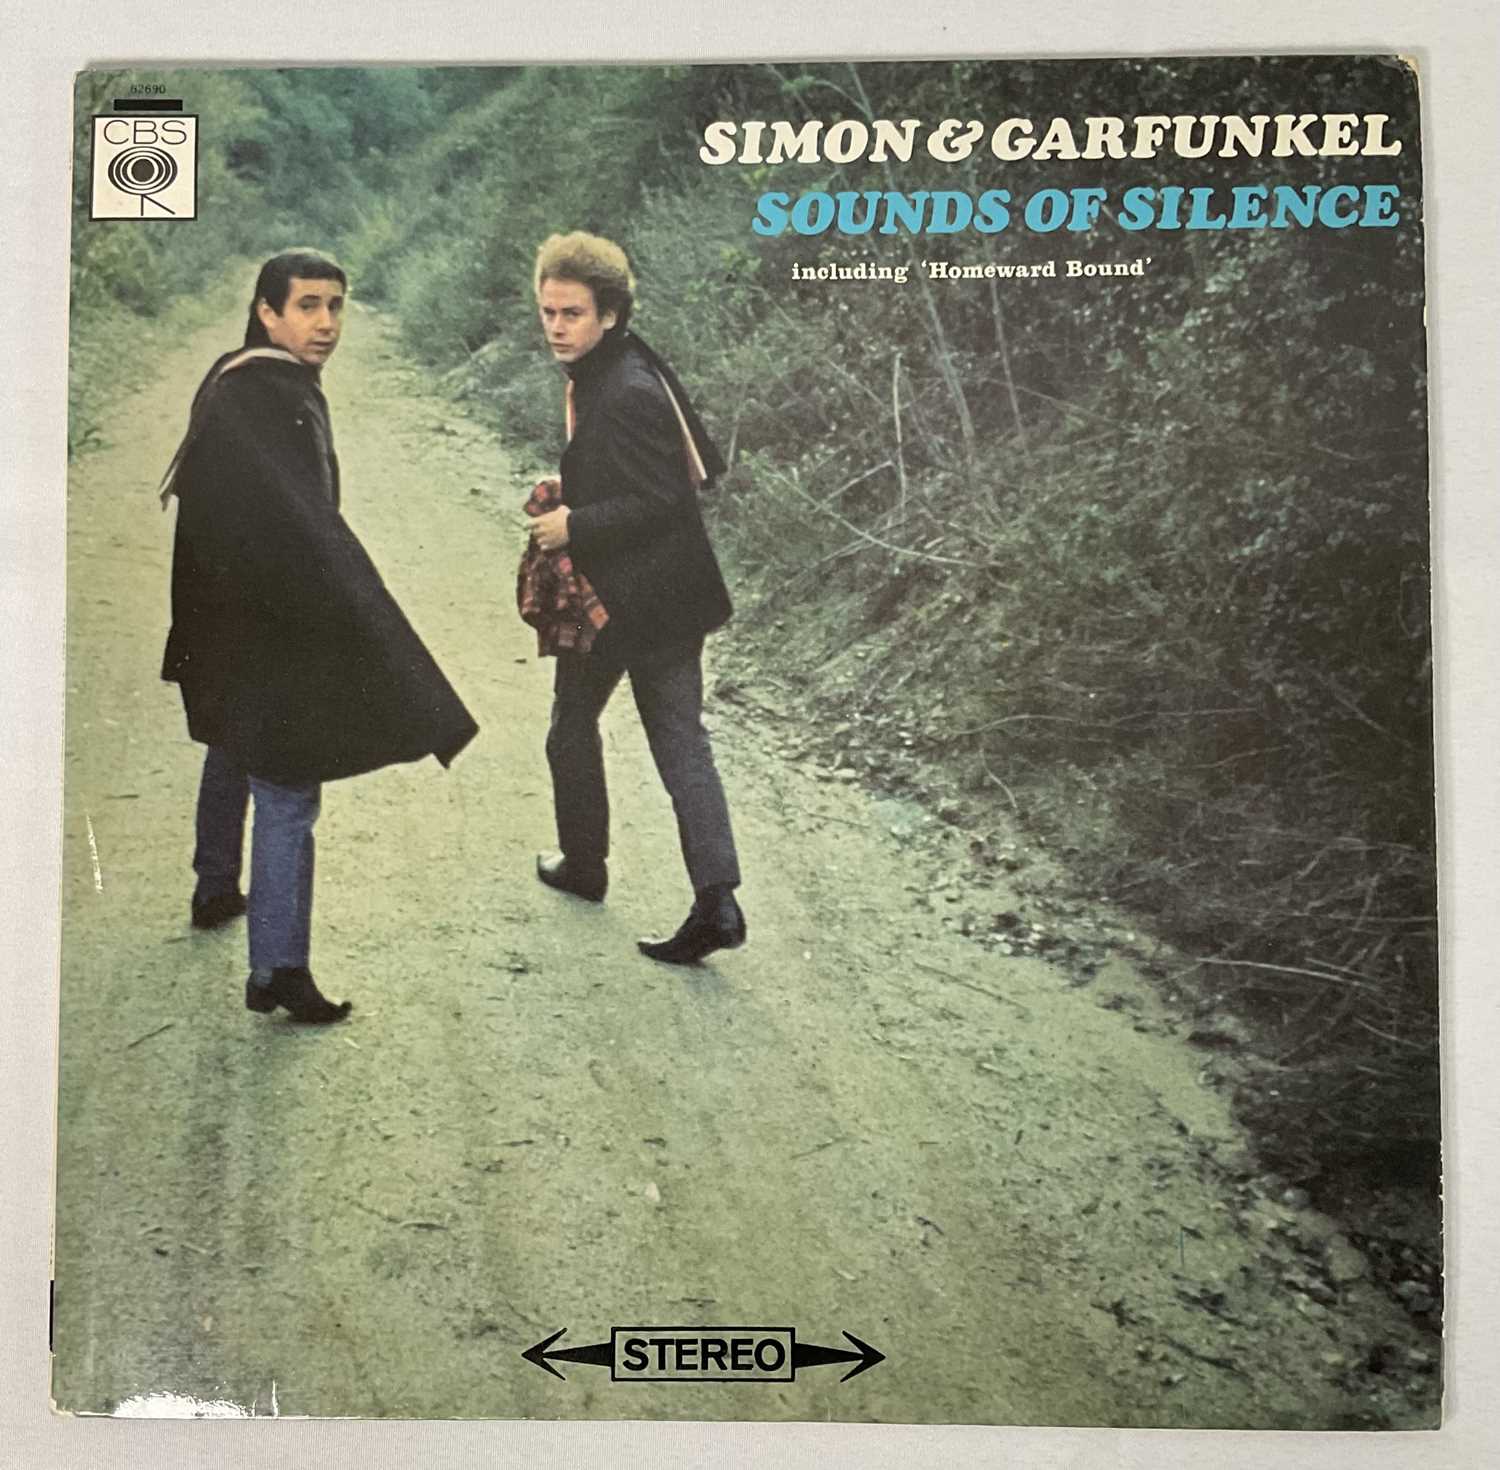 SIMON AND GARFUNKEL - SOUNDS OF SILENCE (1966) Vinyl LP signed in blue pen by Paul Simon and Art - Image 2 of 3